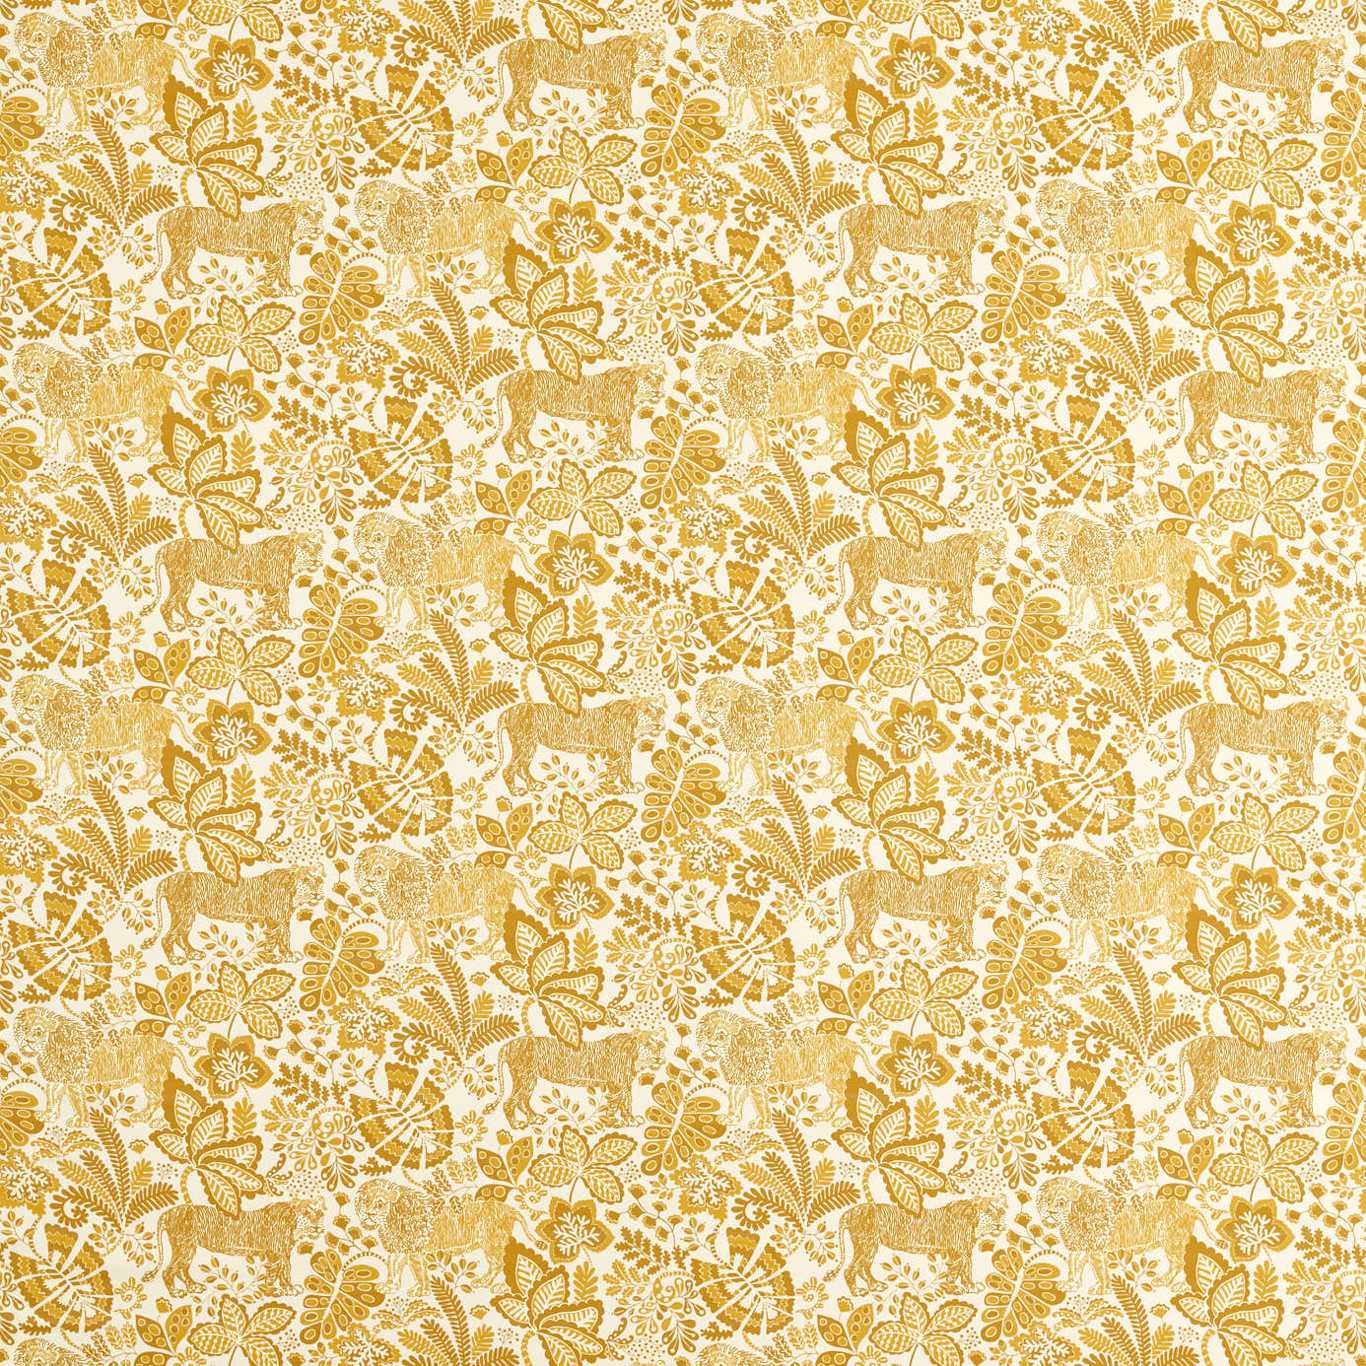 Rumble In The Jungle Fabric by Scion